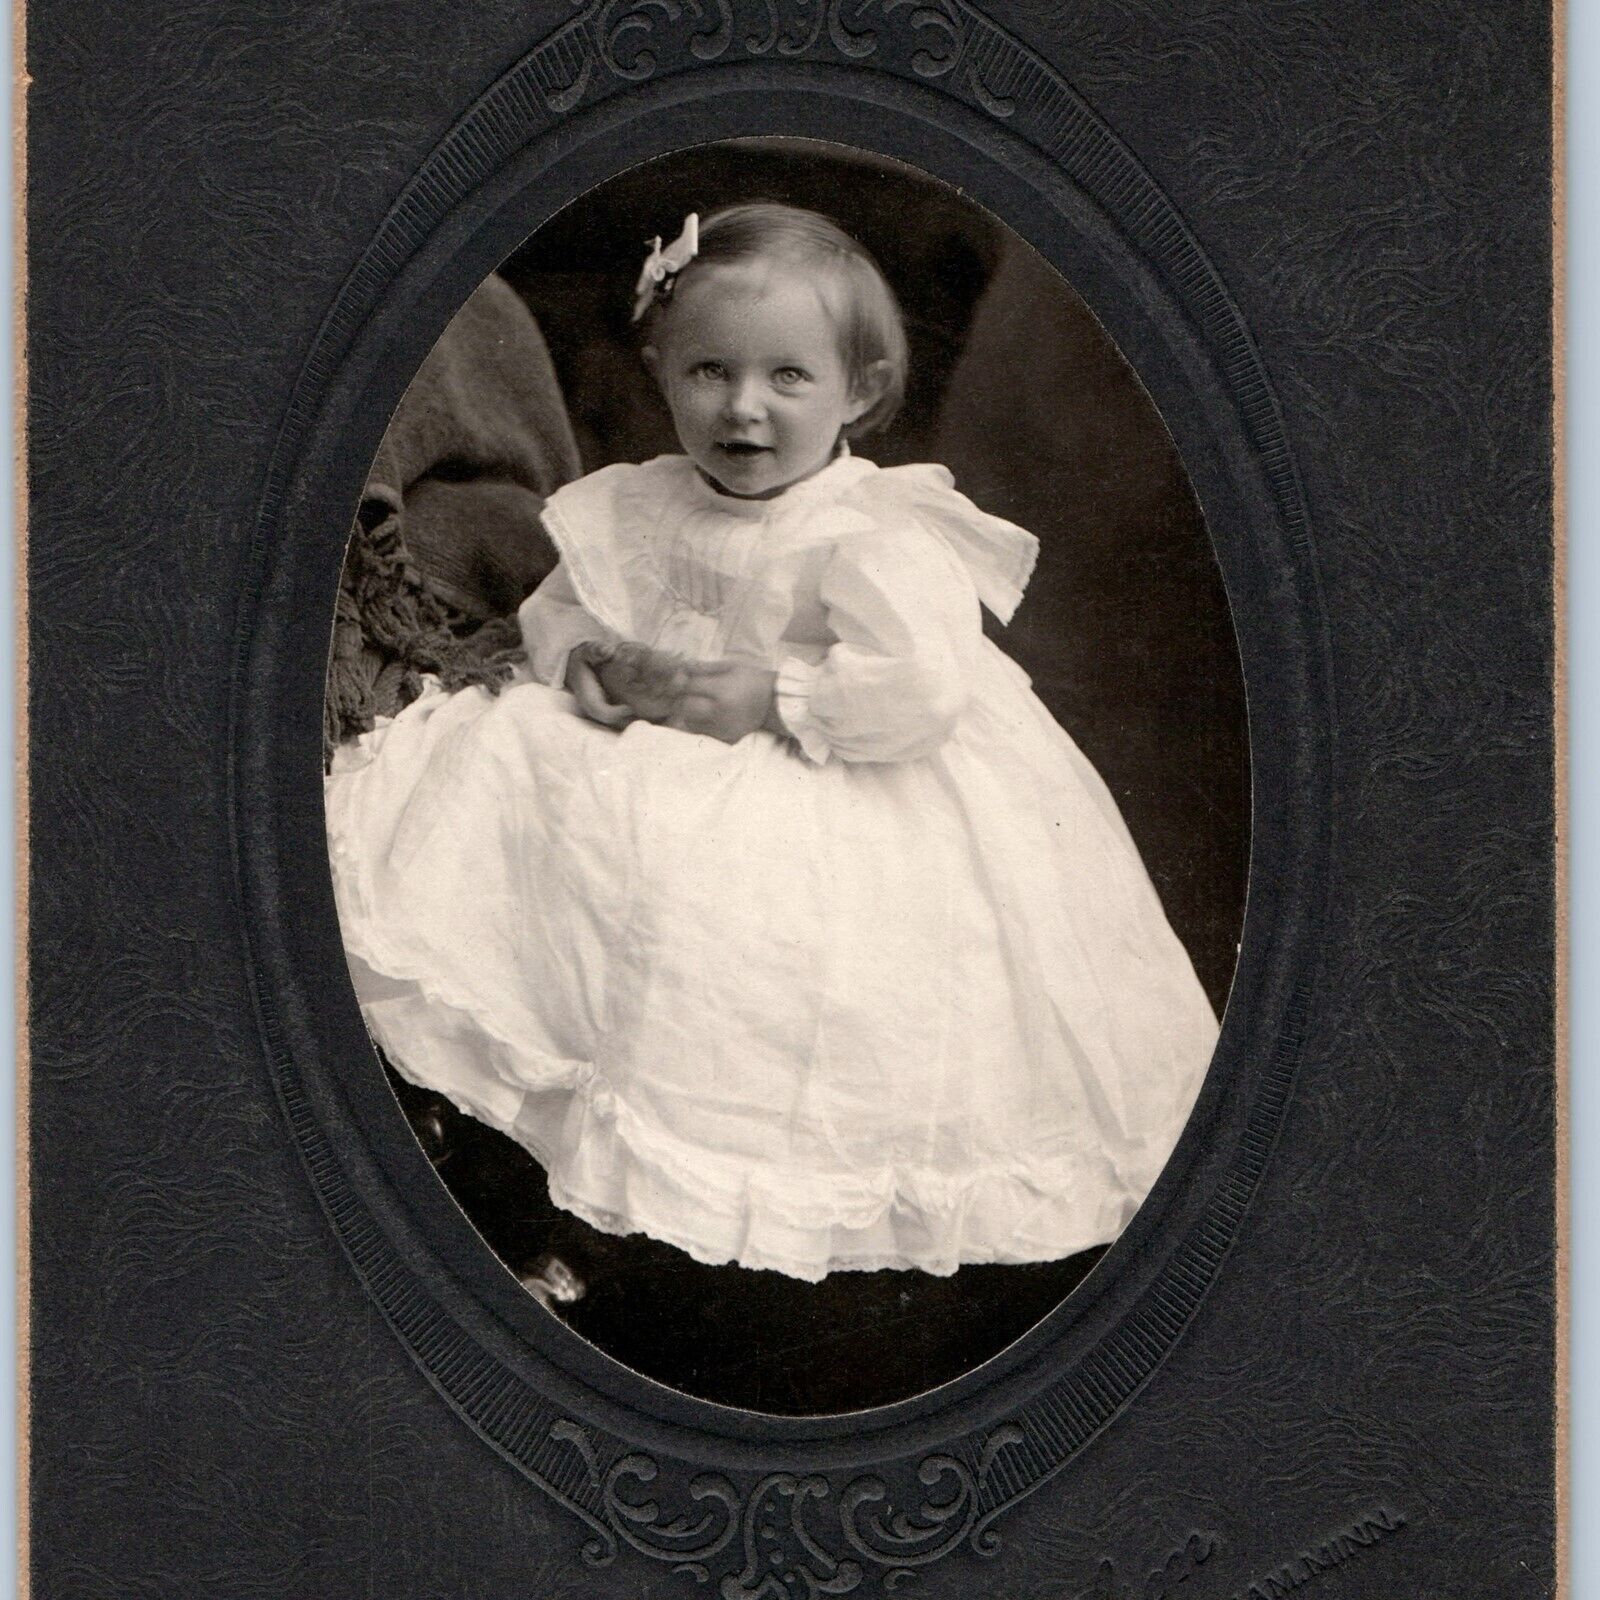 1900s Perham MN Adorable Smile Baby Girl Cabinet Card Cute Bright Eyes Olson B24